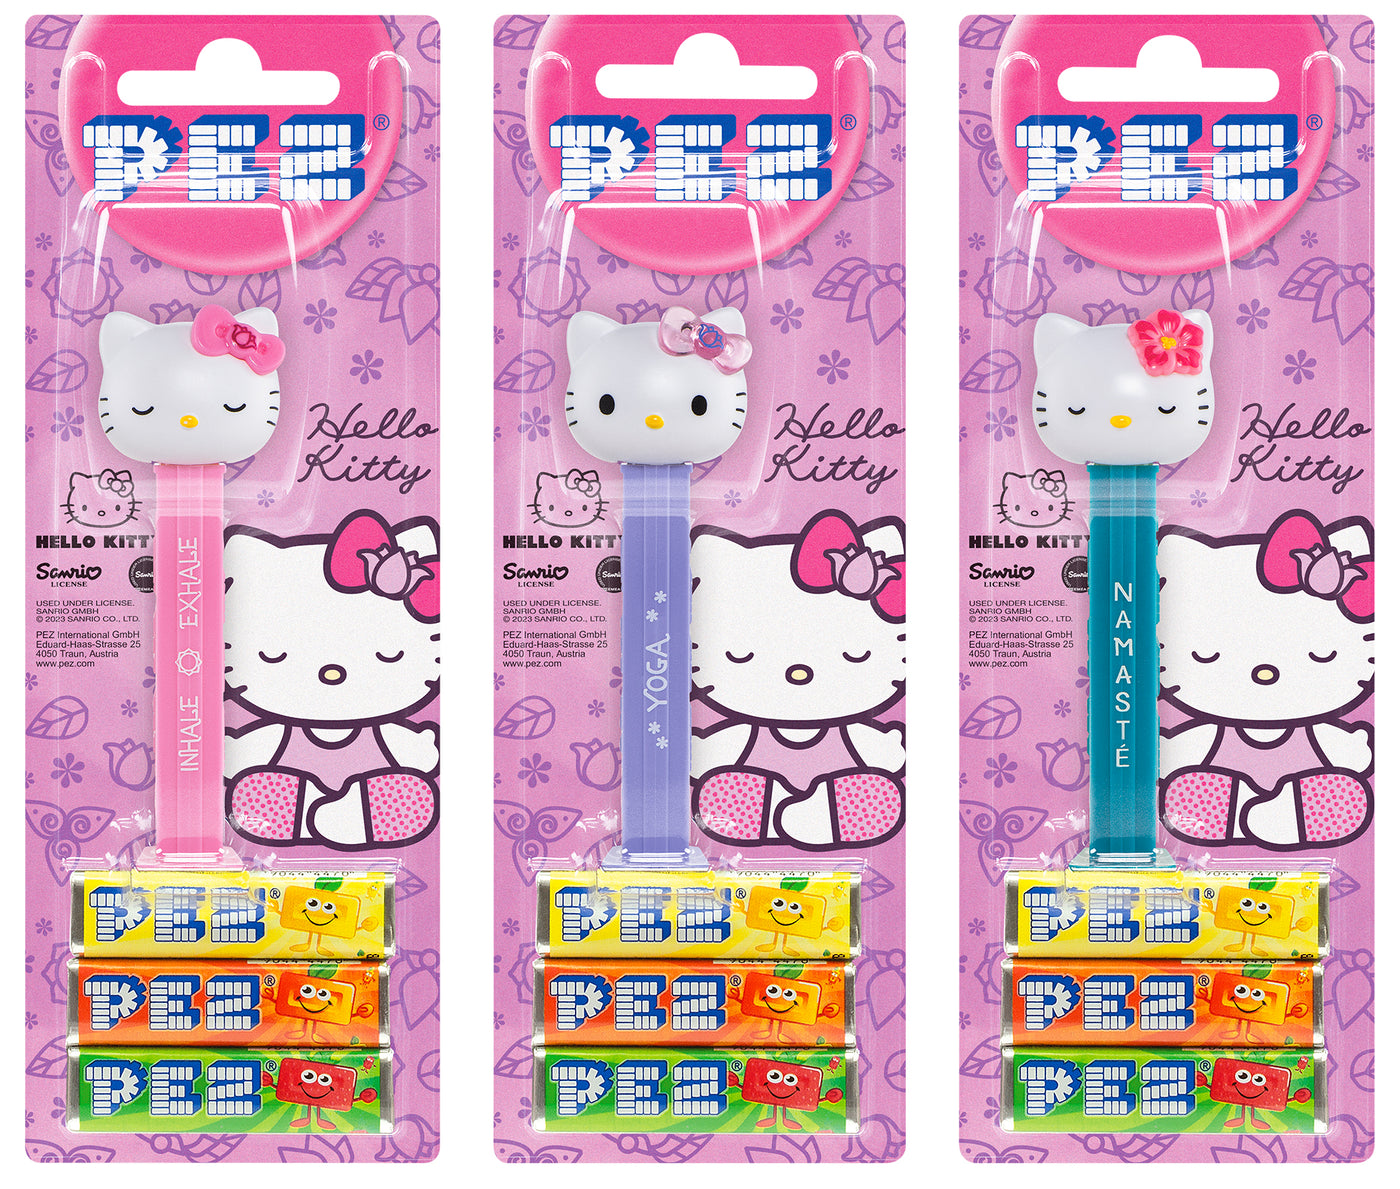 Hello Kitty Lunch Bag: Sweetie  Hello kitty lunch bag, Hello kitty  coloring, Hello kitty